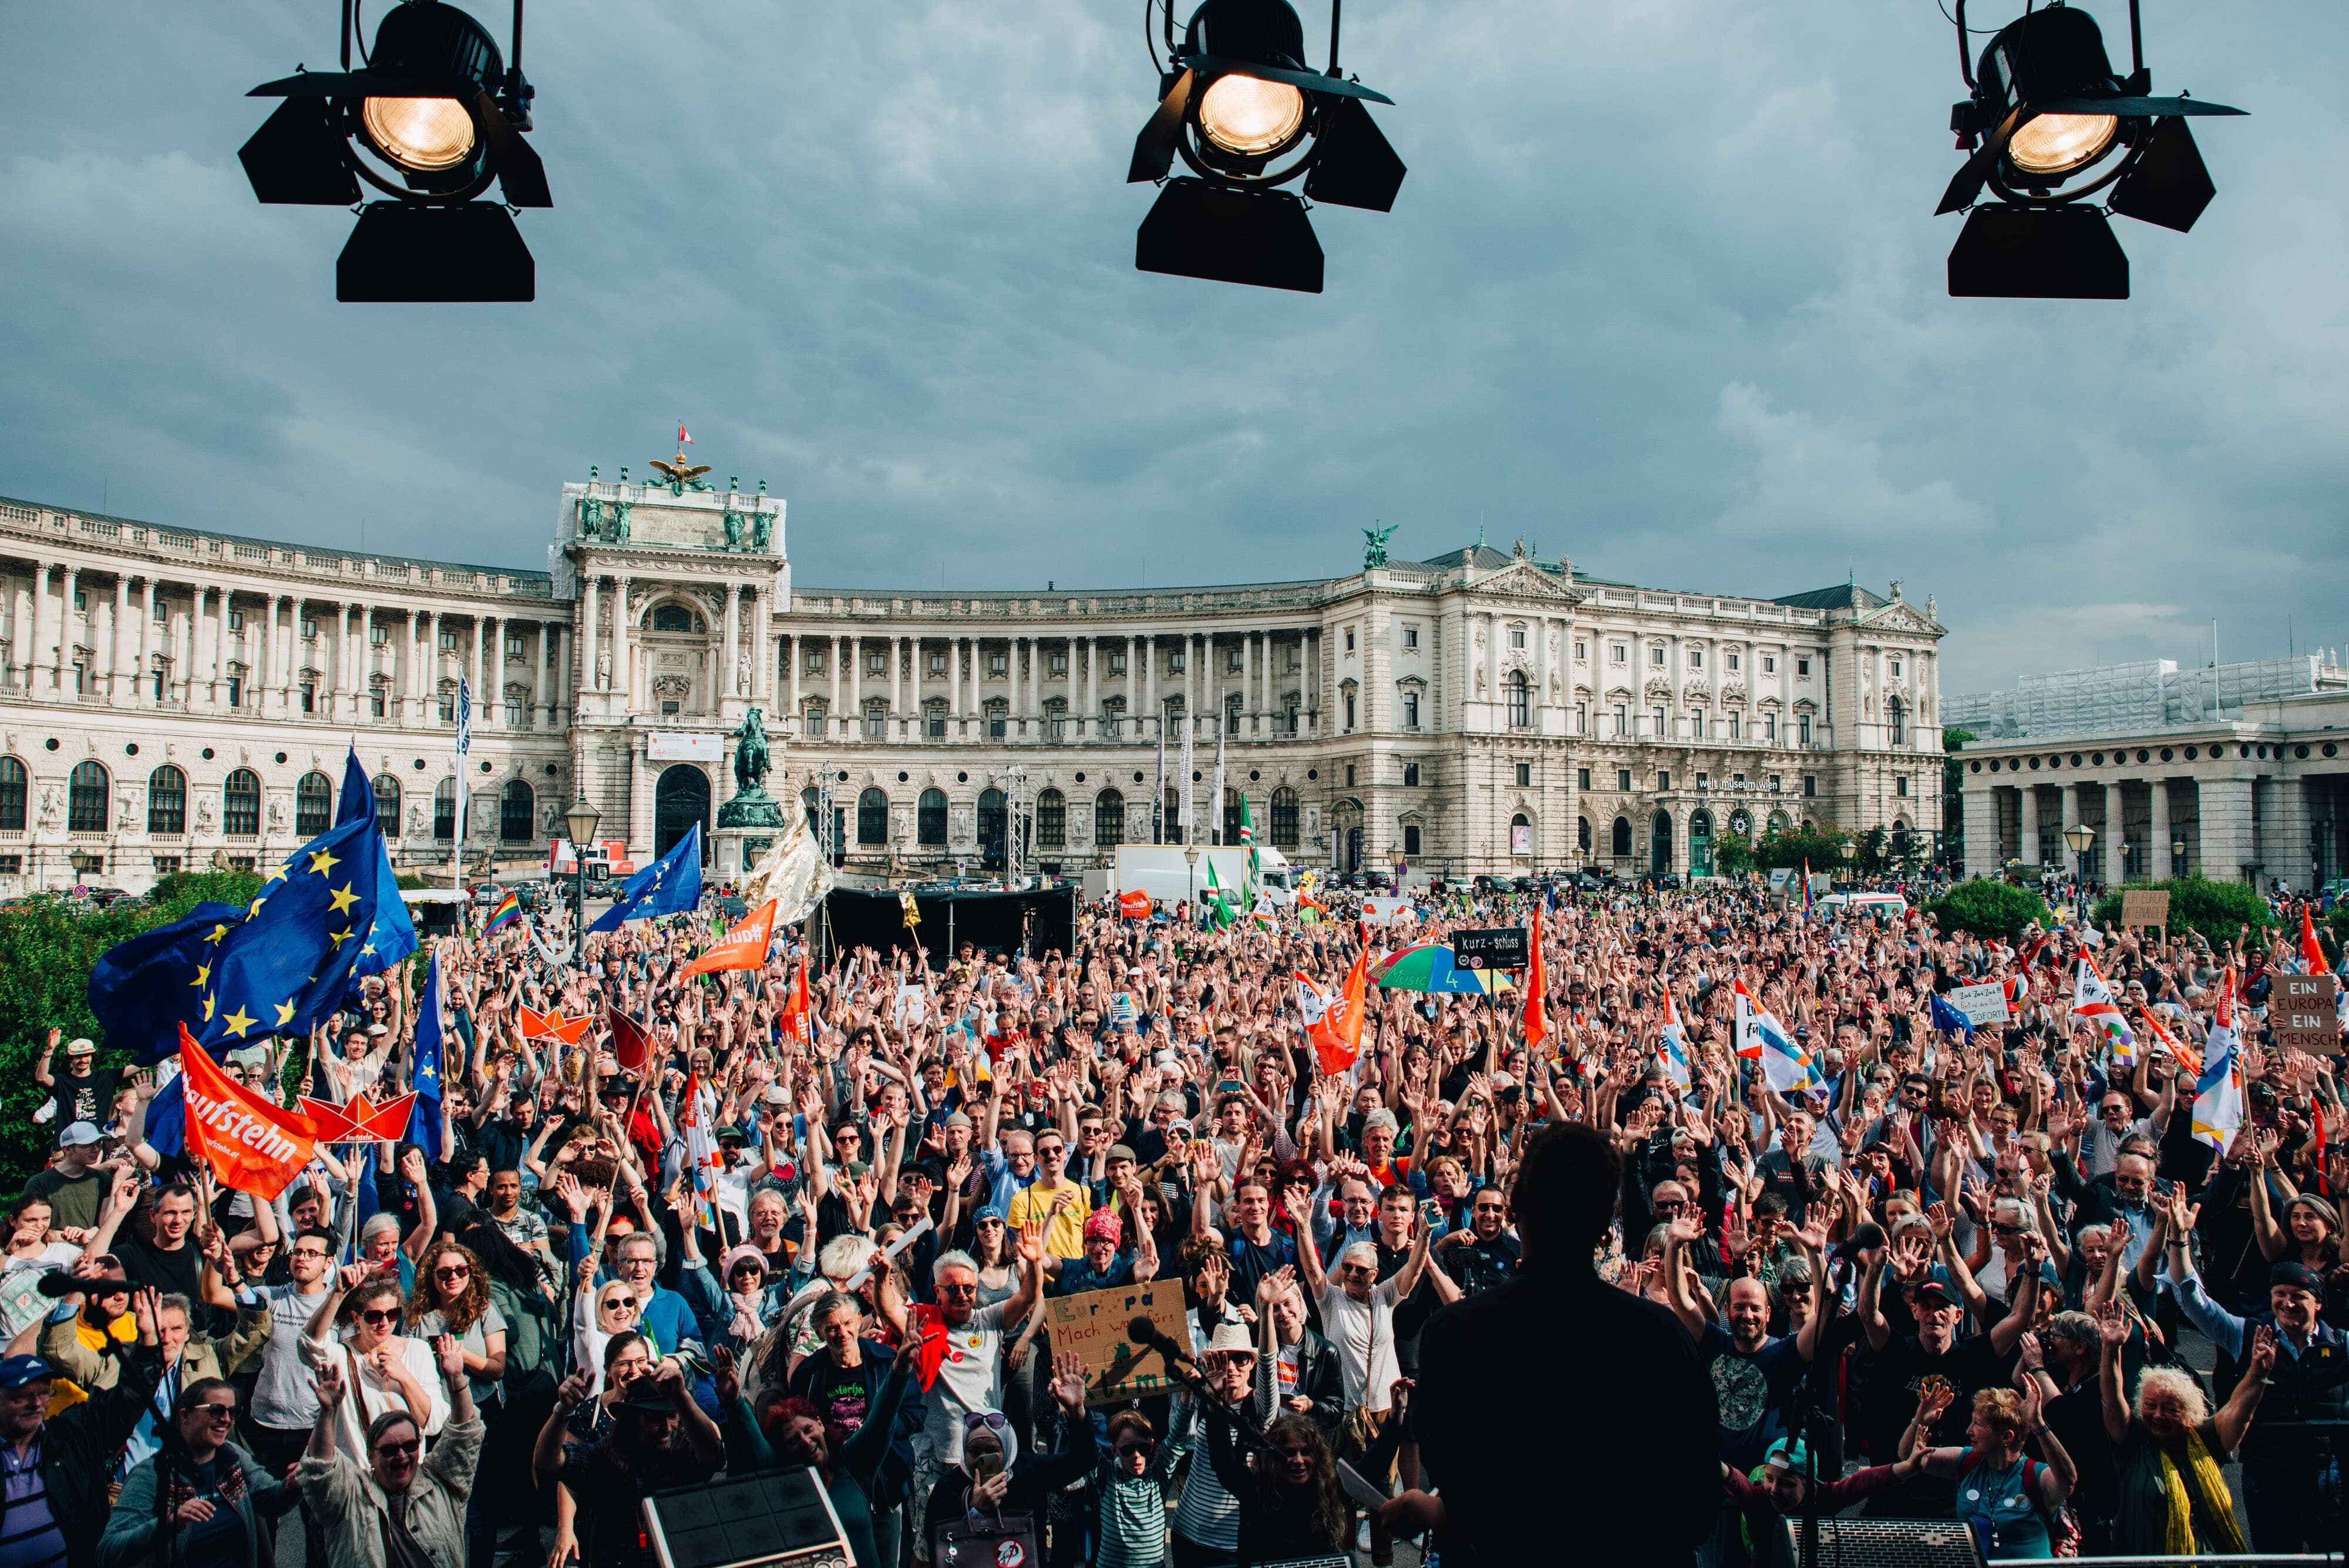 Photo of a crowd gathered at a plaza, waving EU and other flags